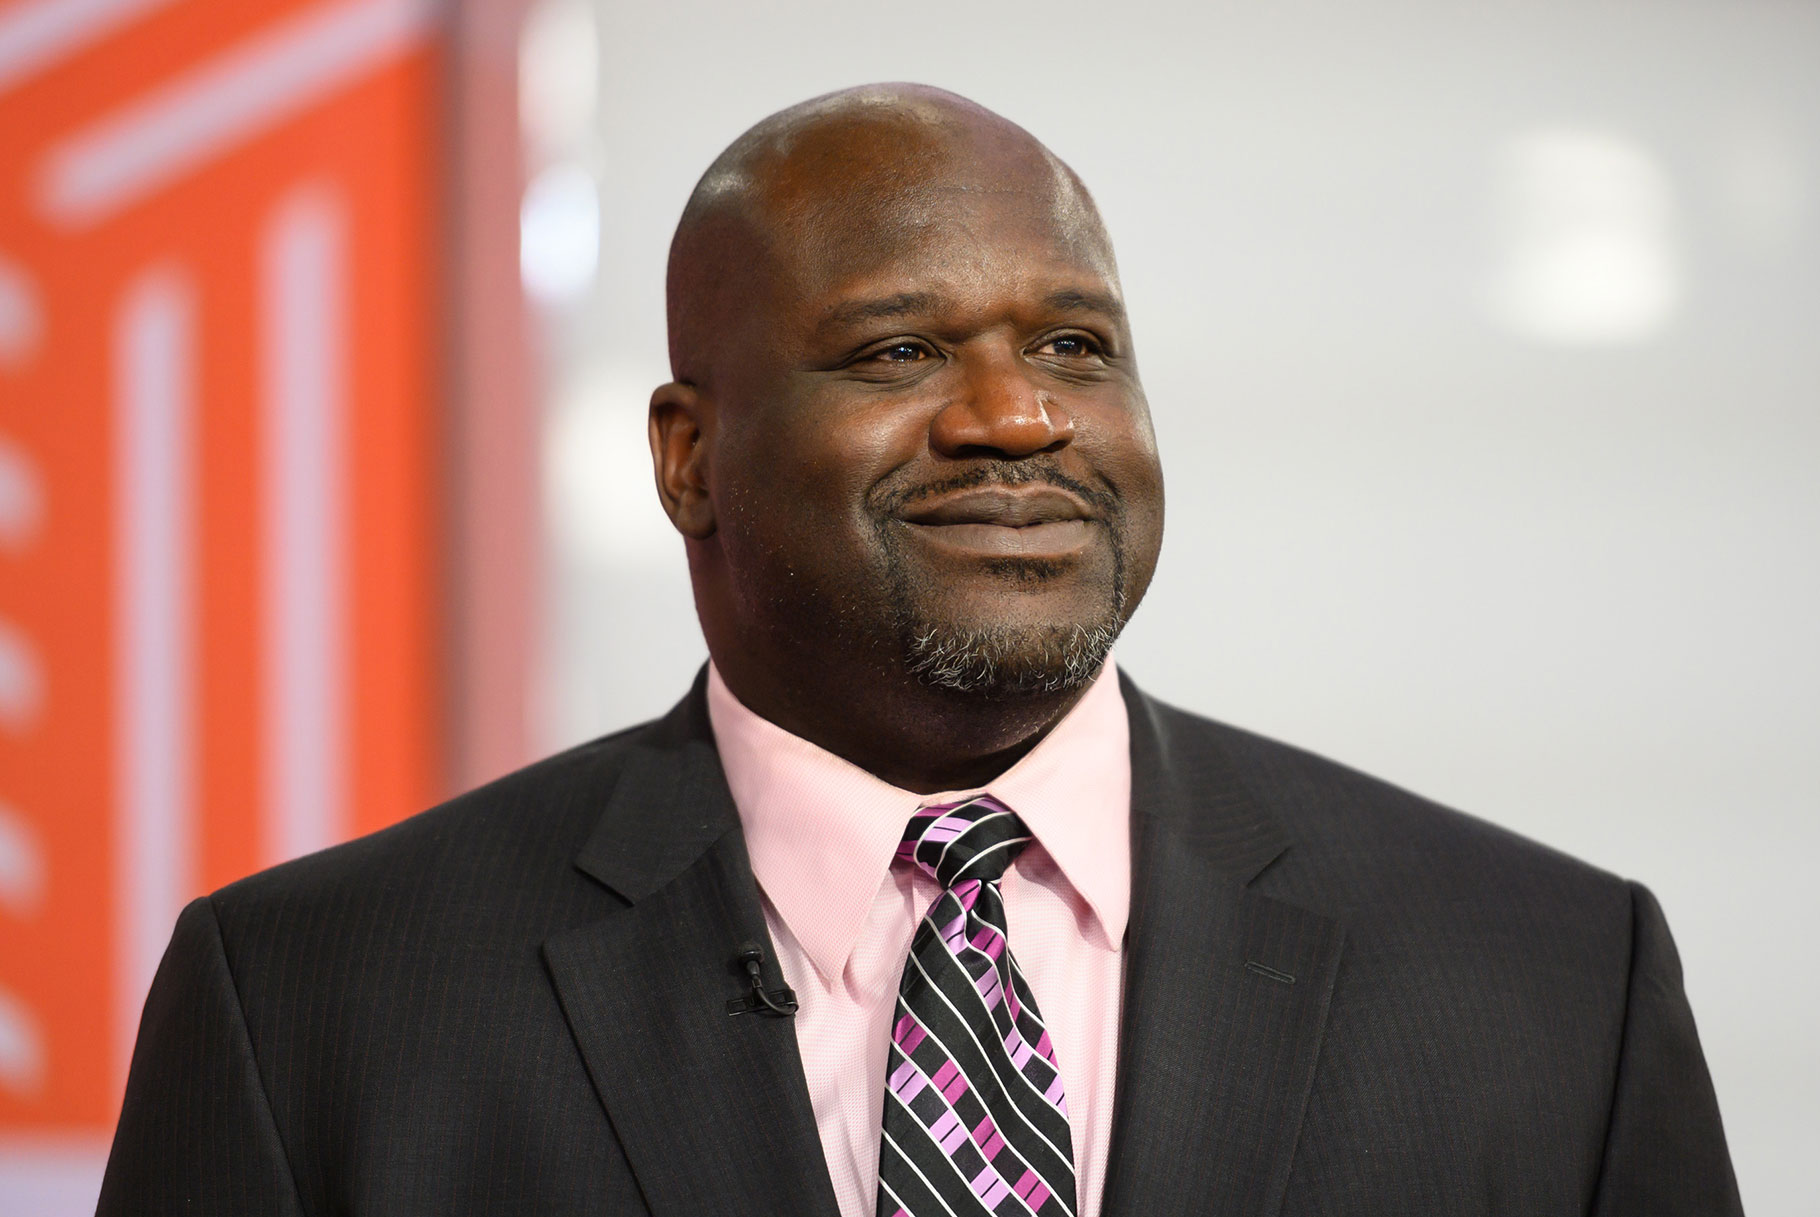 Shaquille O’Neal Net Worth, Early Life, Biography, Family, Personal